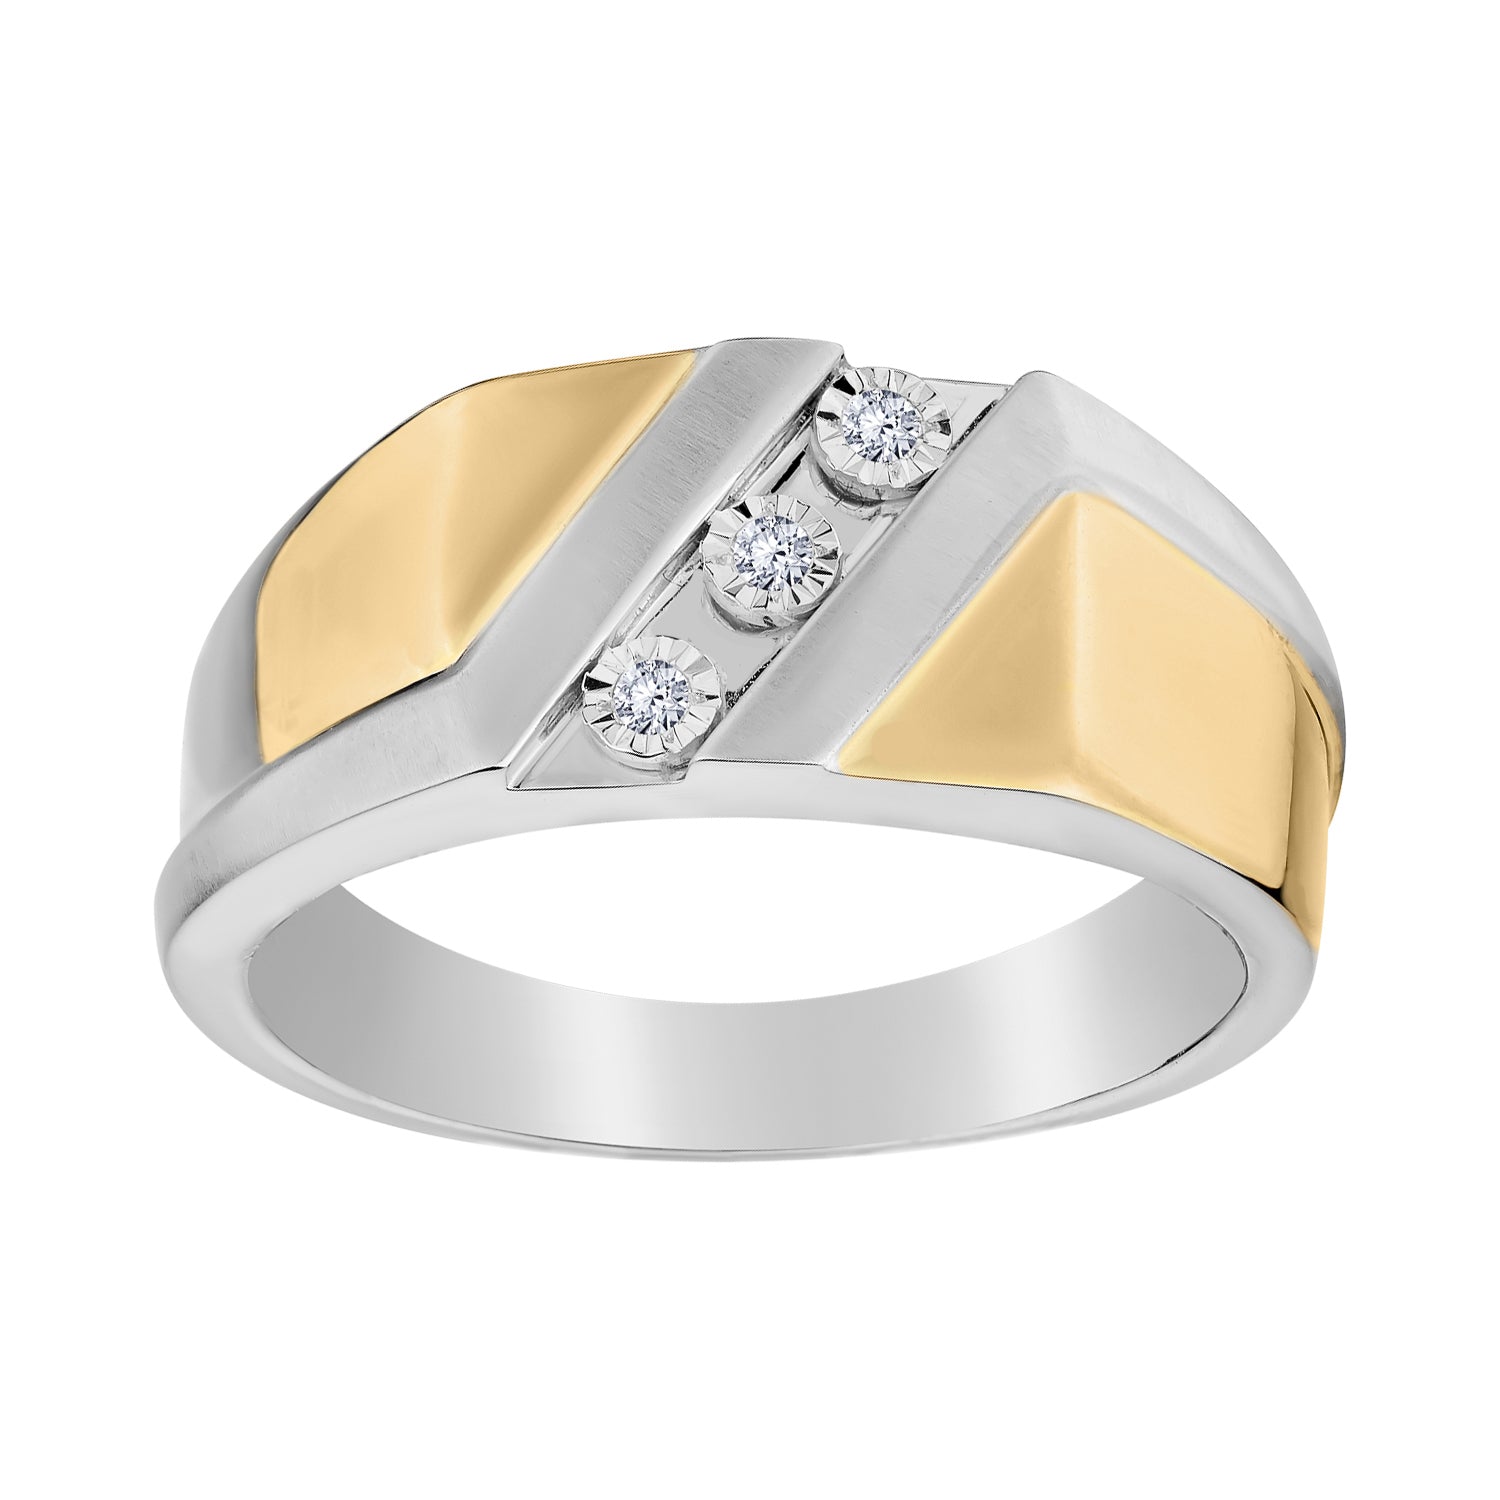 .05 CARAT DIAMOND "PAST, PRESENT, FUTURE" RING, 10kt WHITE AND YELLOW GOLD (TWO TONE). Men’s Rings.  - Griffin Jewellery Designs